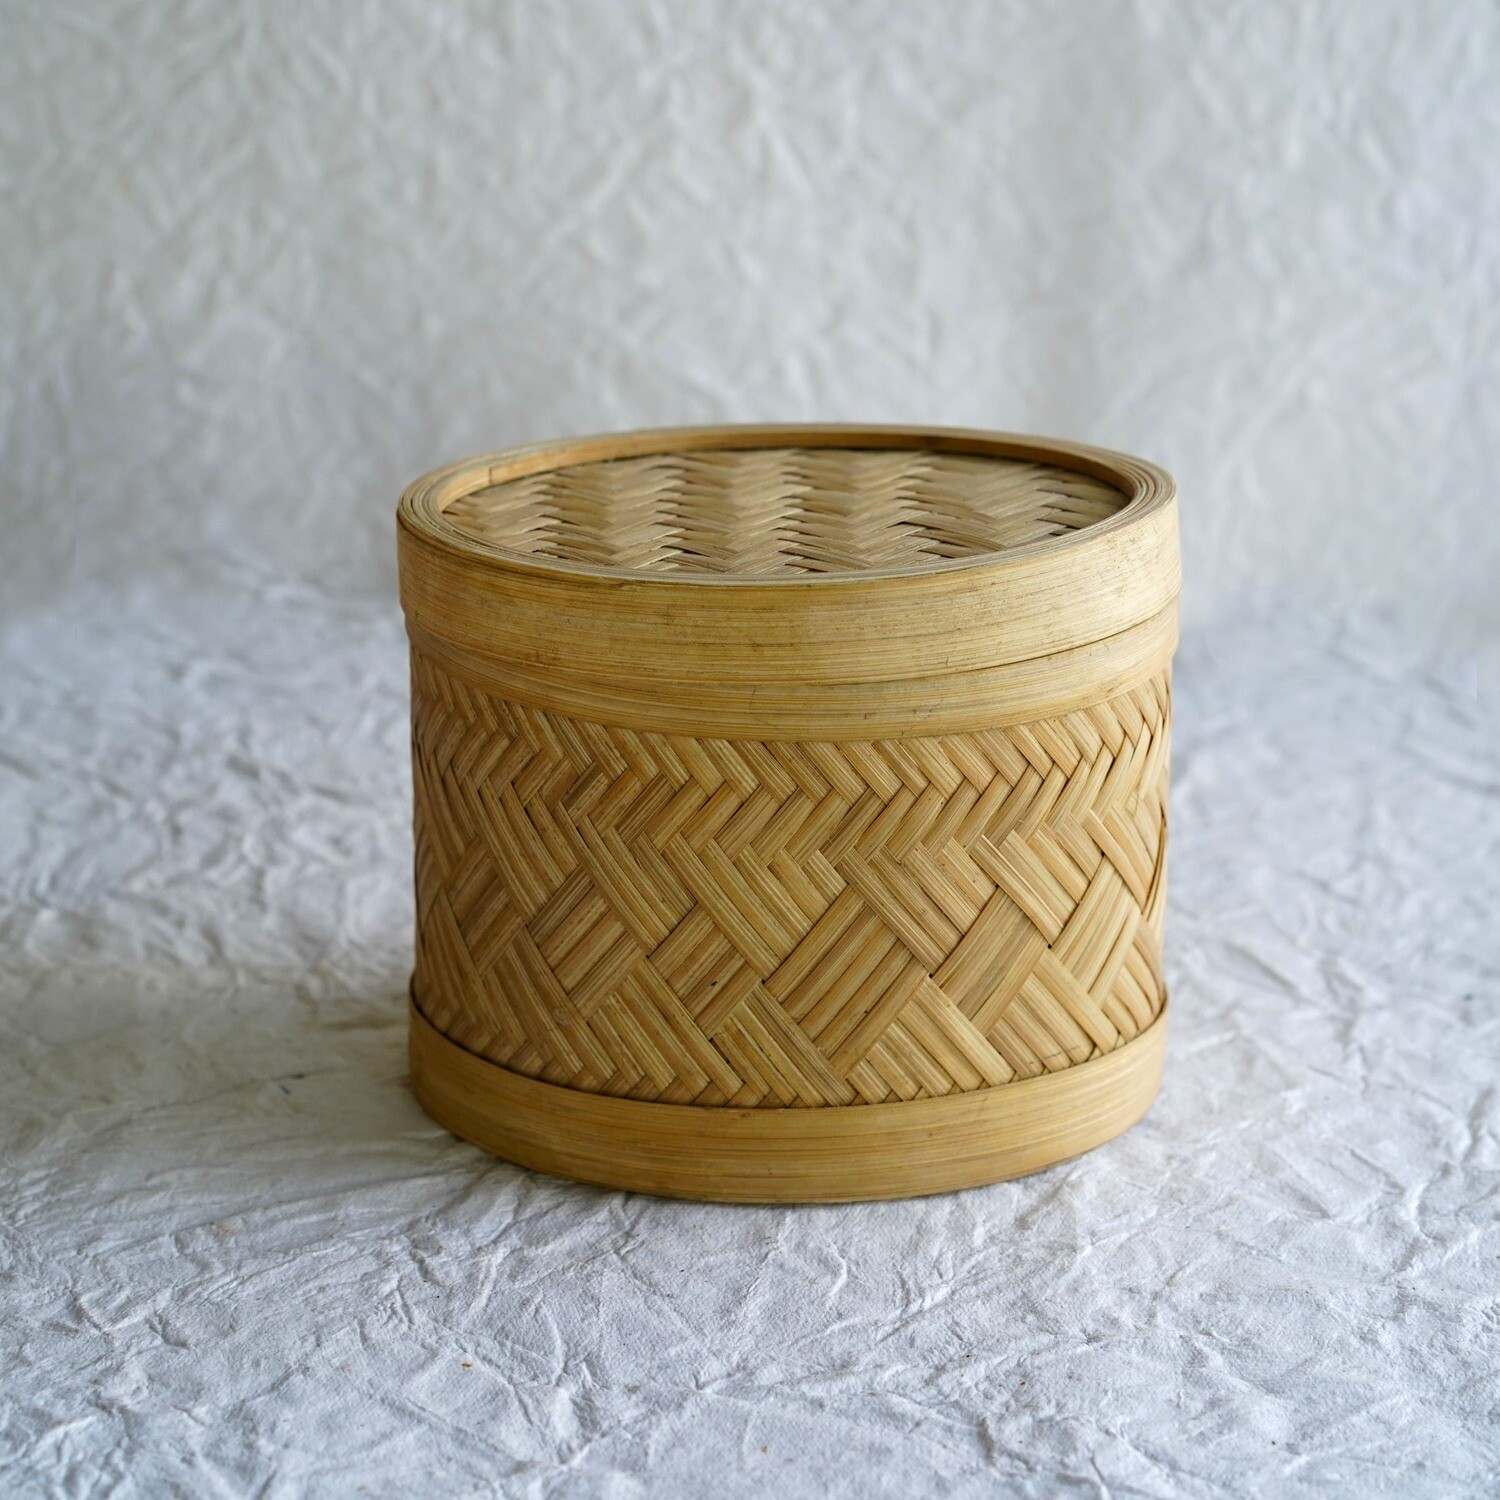 Basketry Woven Handcrafted Trinket Box